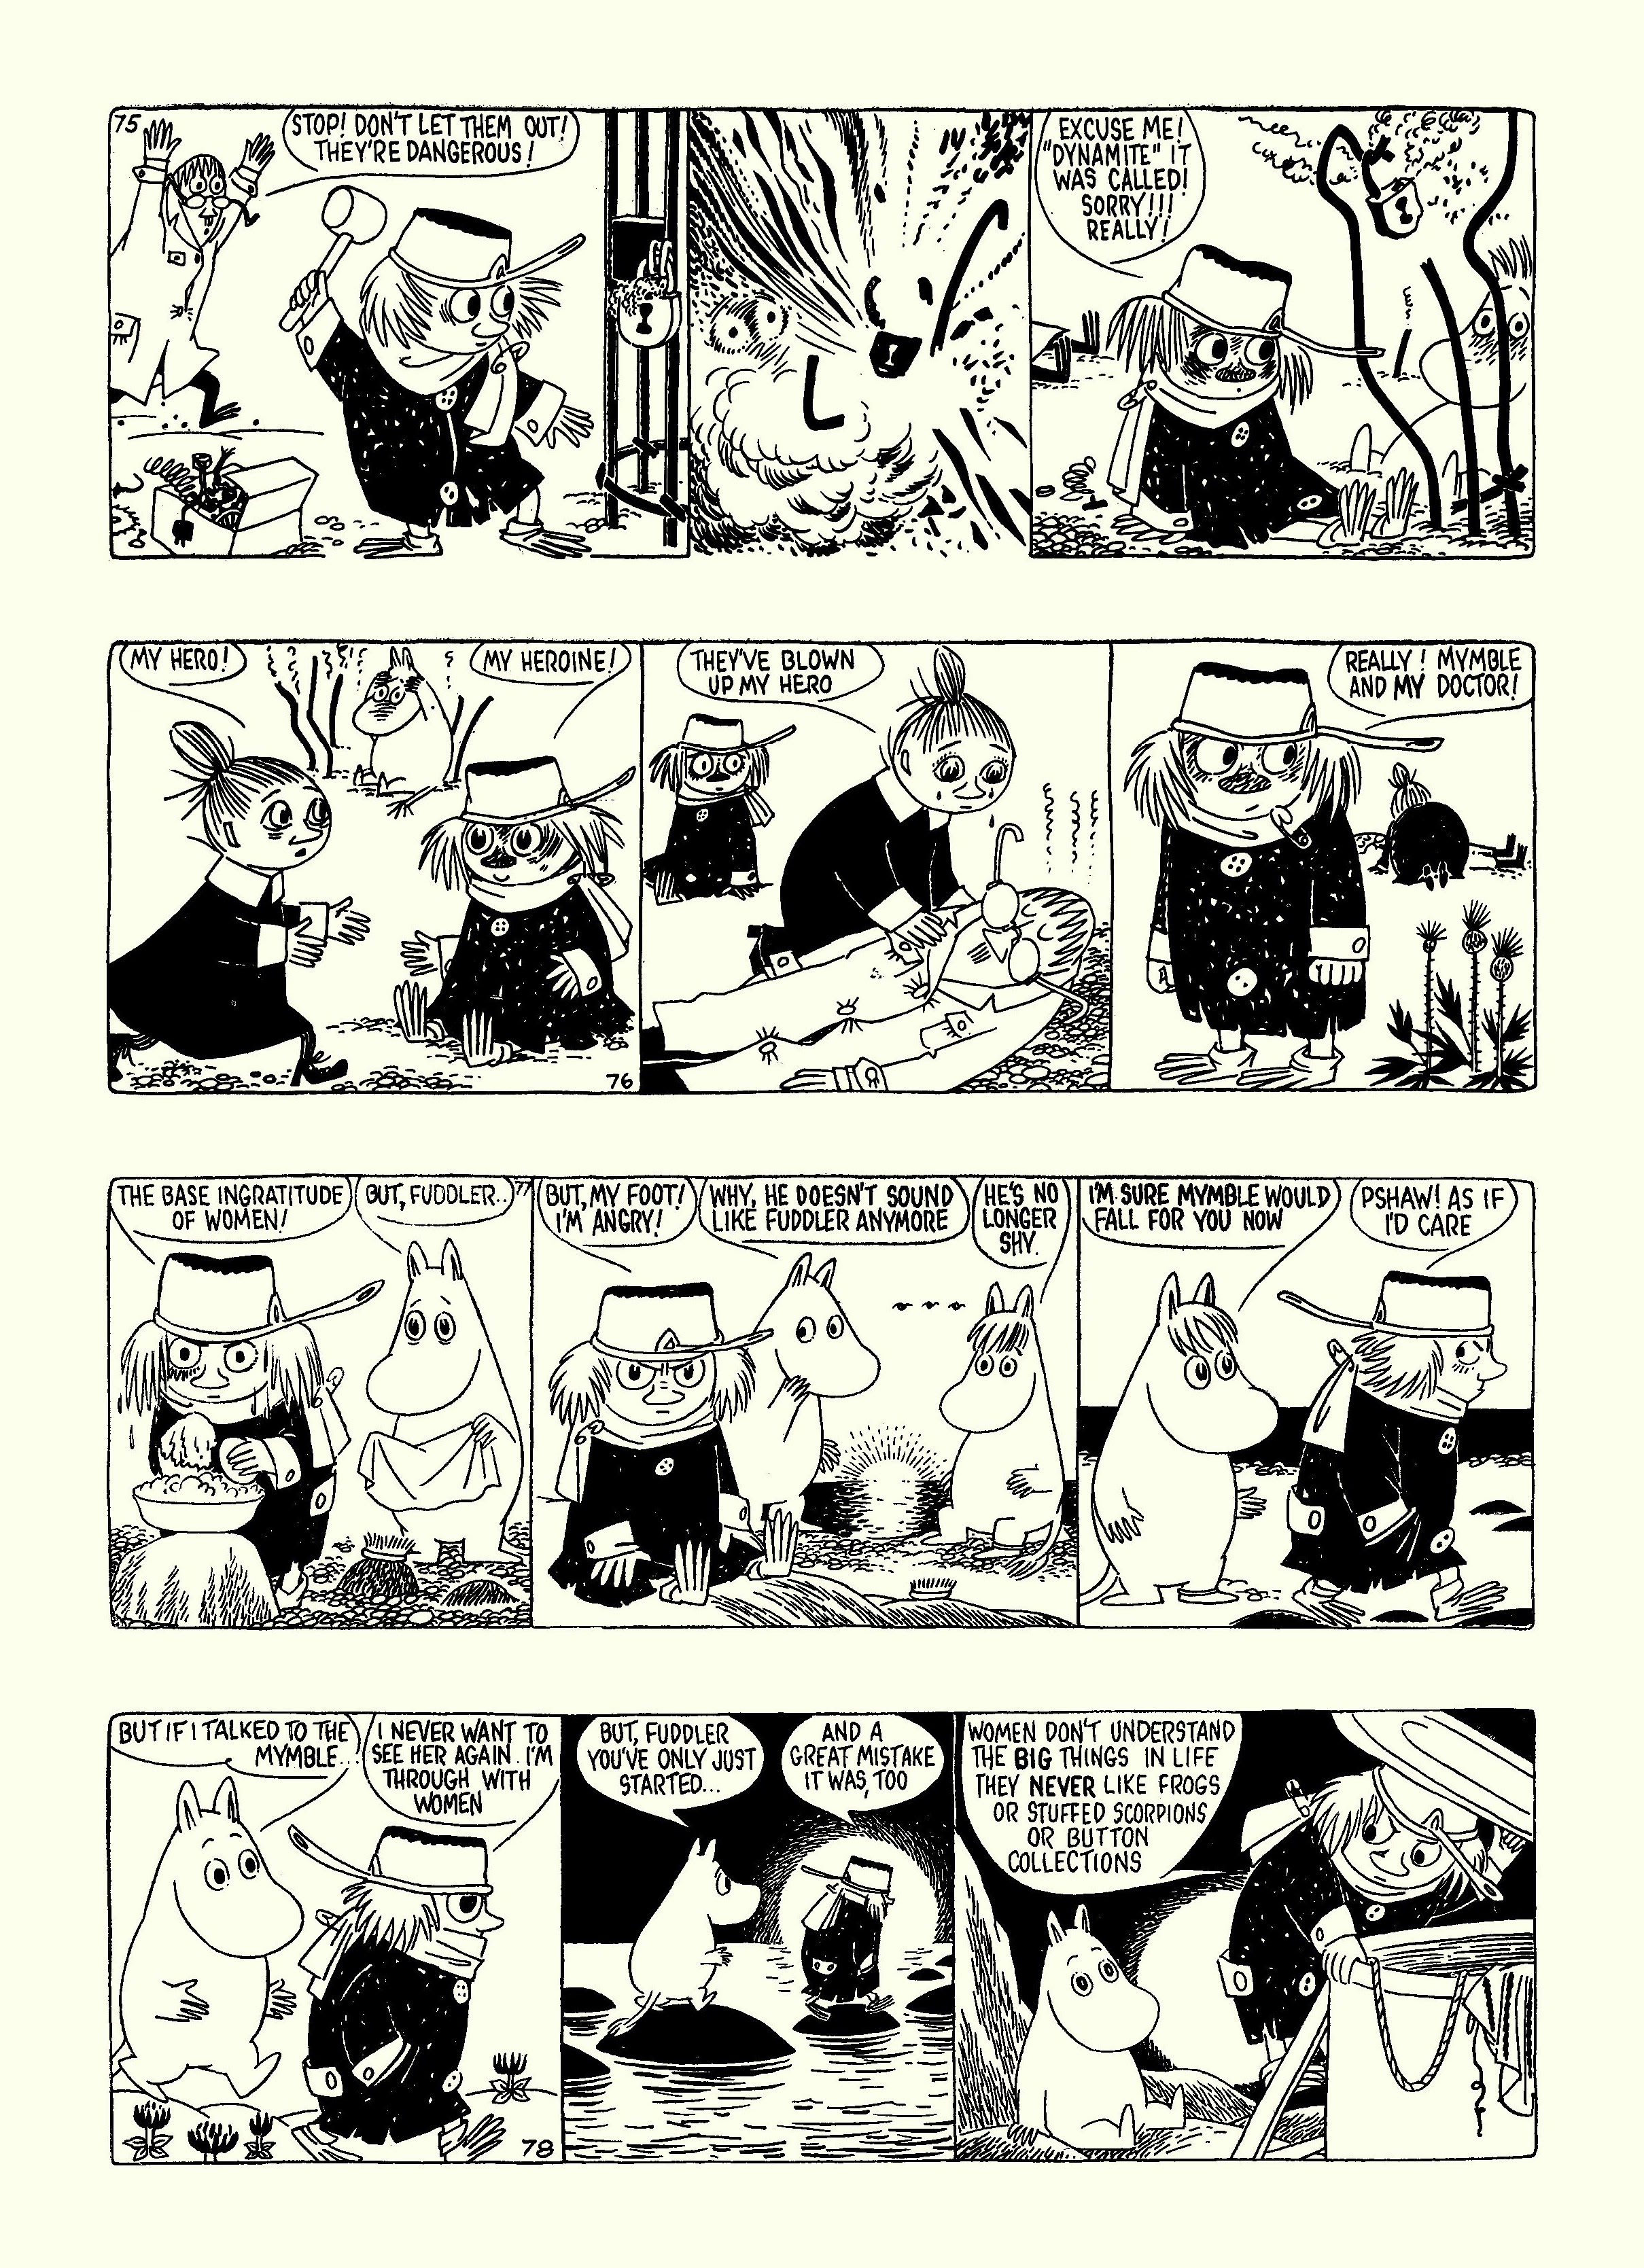 Read online Moomin: The Complete Tove Jansson Comic Strip comic -  Issue # TPB 5 - 76